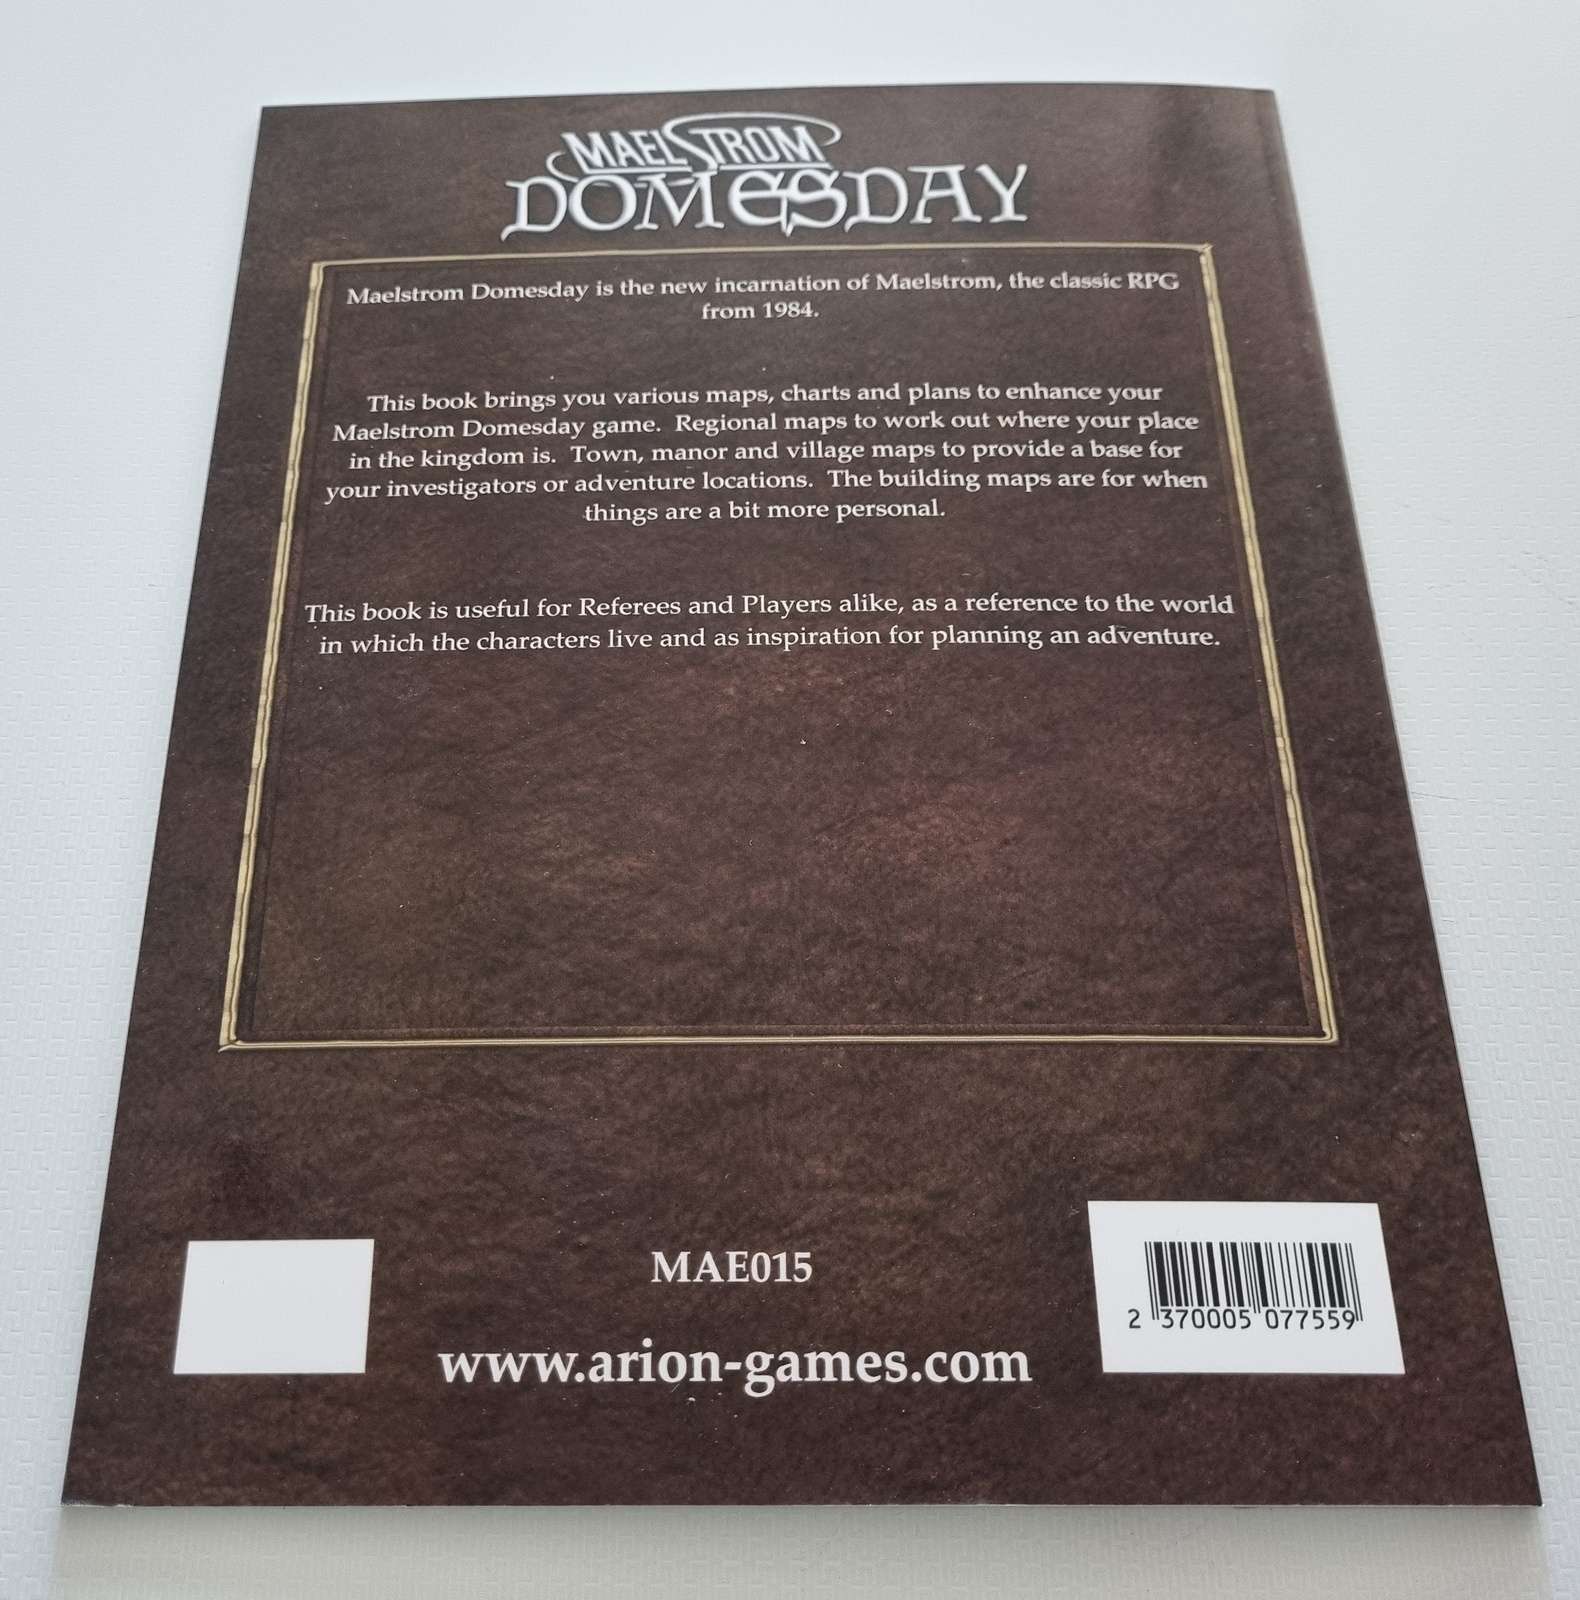 Maelstrom Domesday - Domesday Maps and Charts